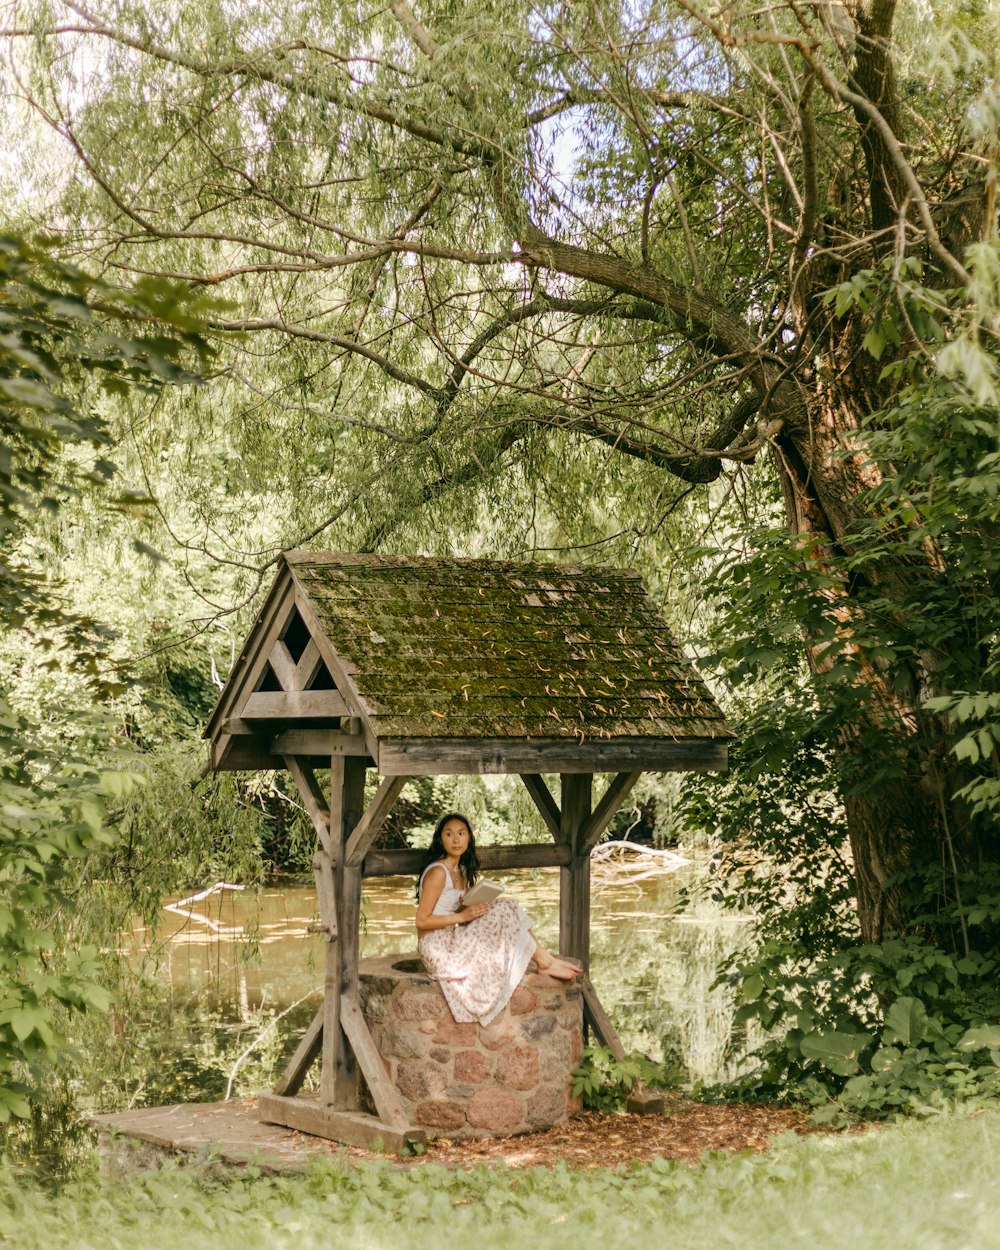 a woman sitting on a stone bench under a tree